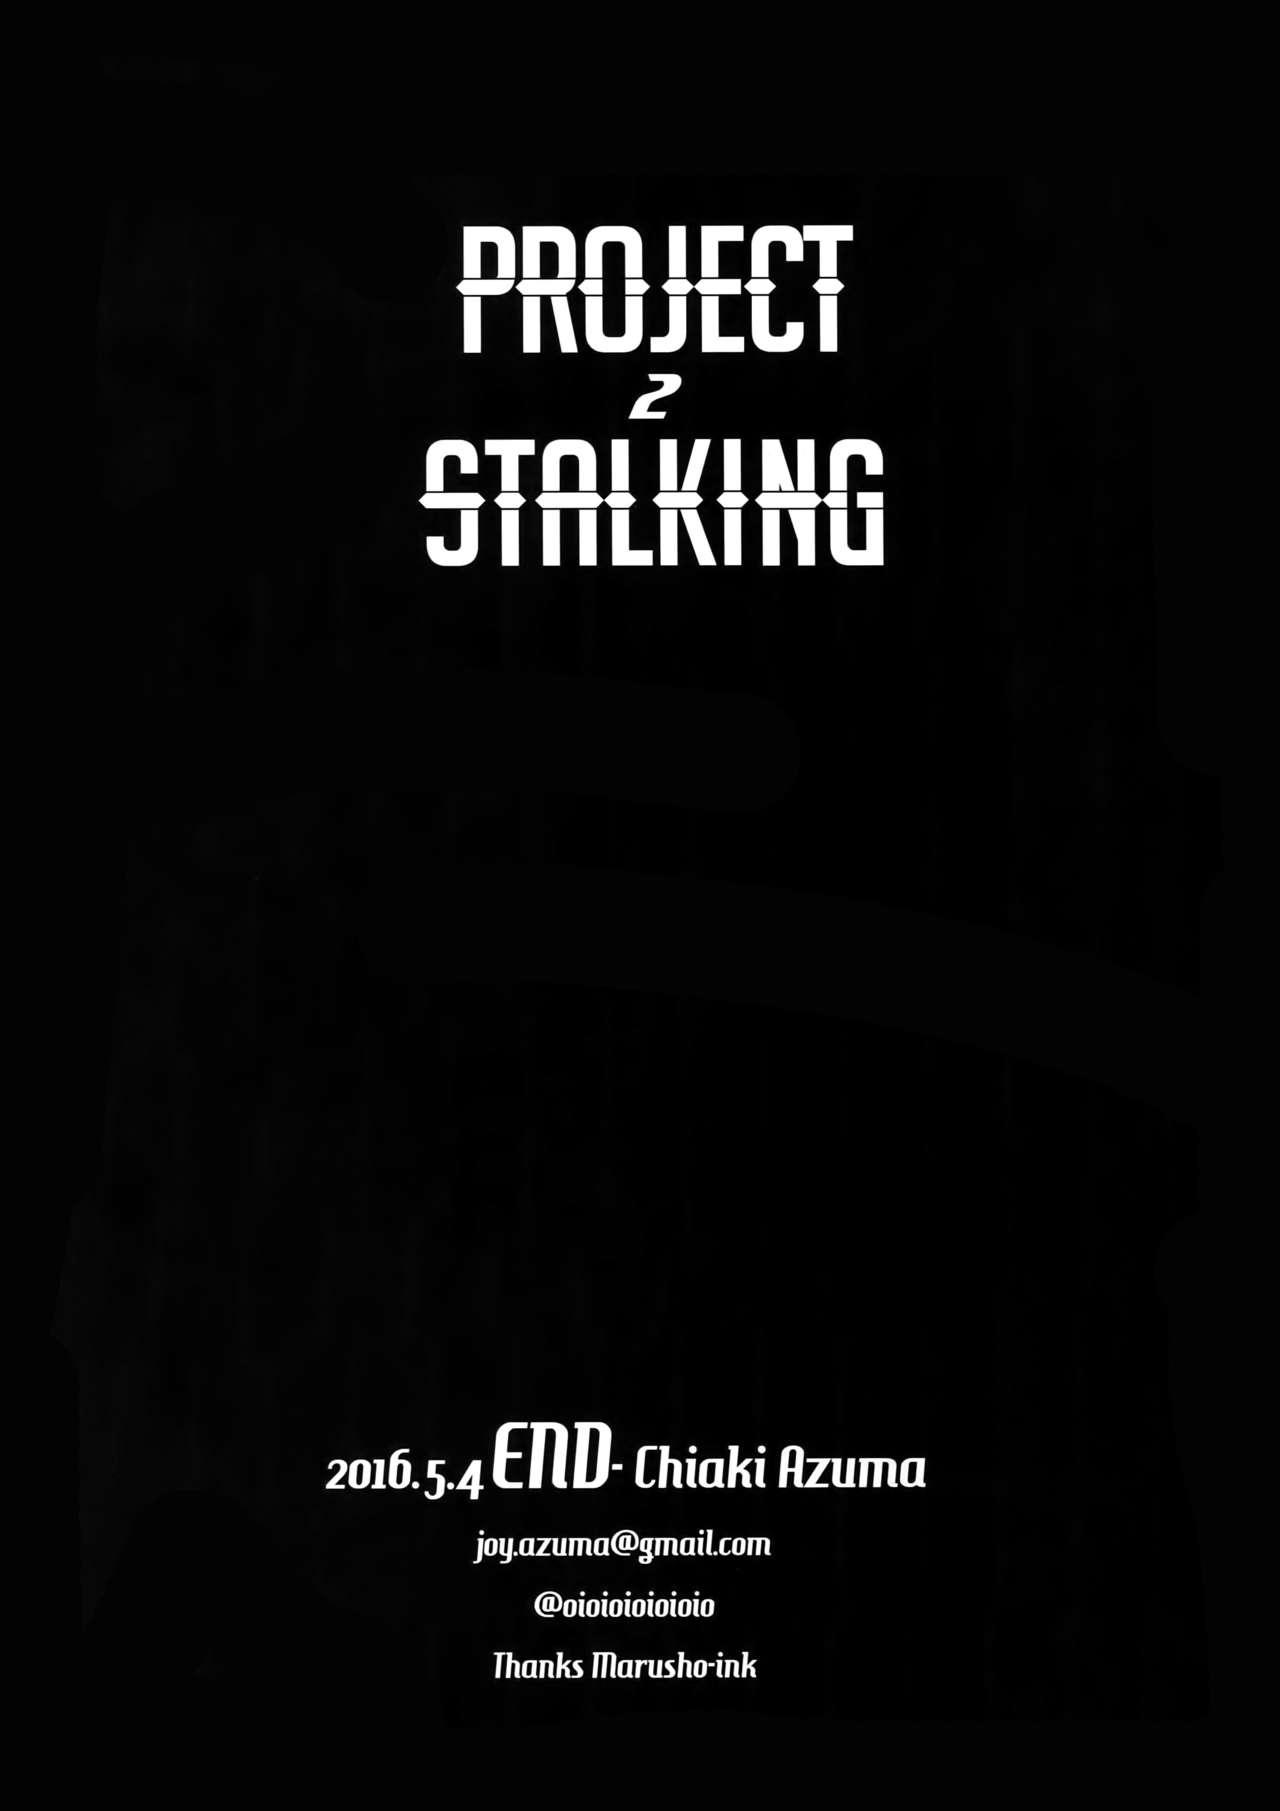 PROJECT STALKING 2 20